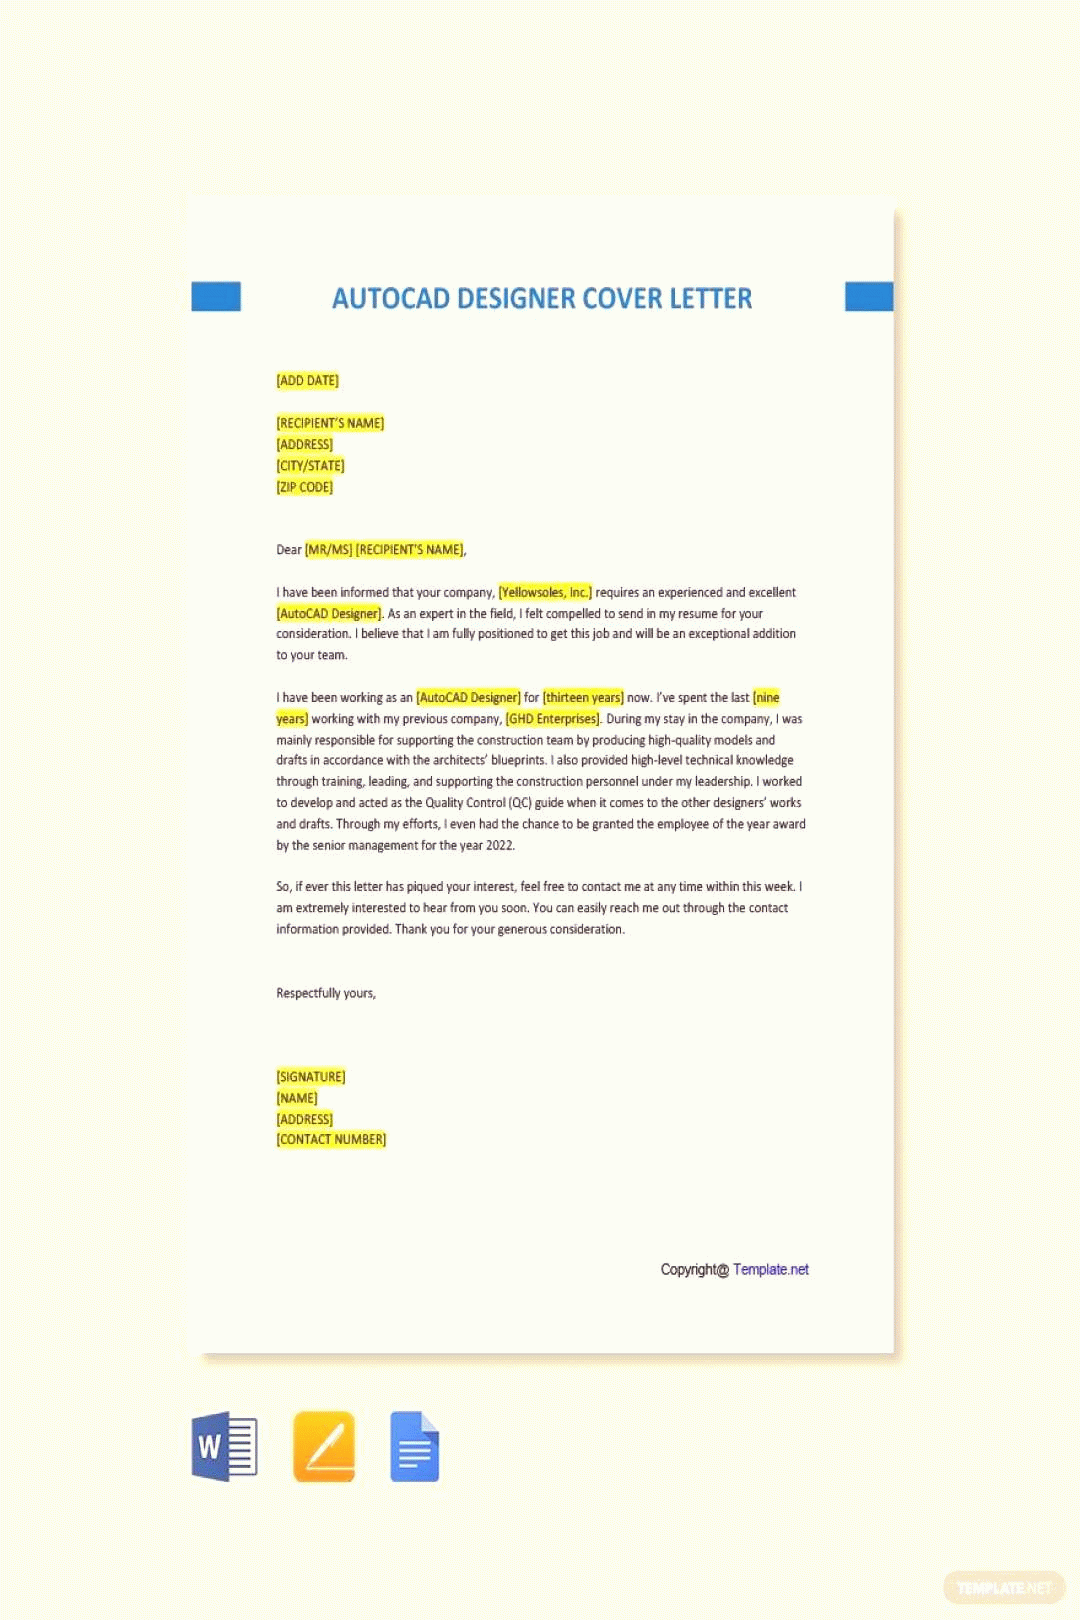 Free Autocad Designer Cover Letter Template In